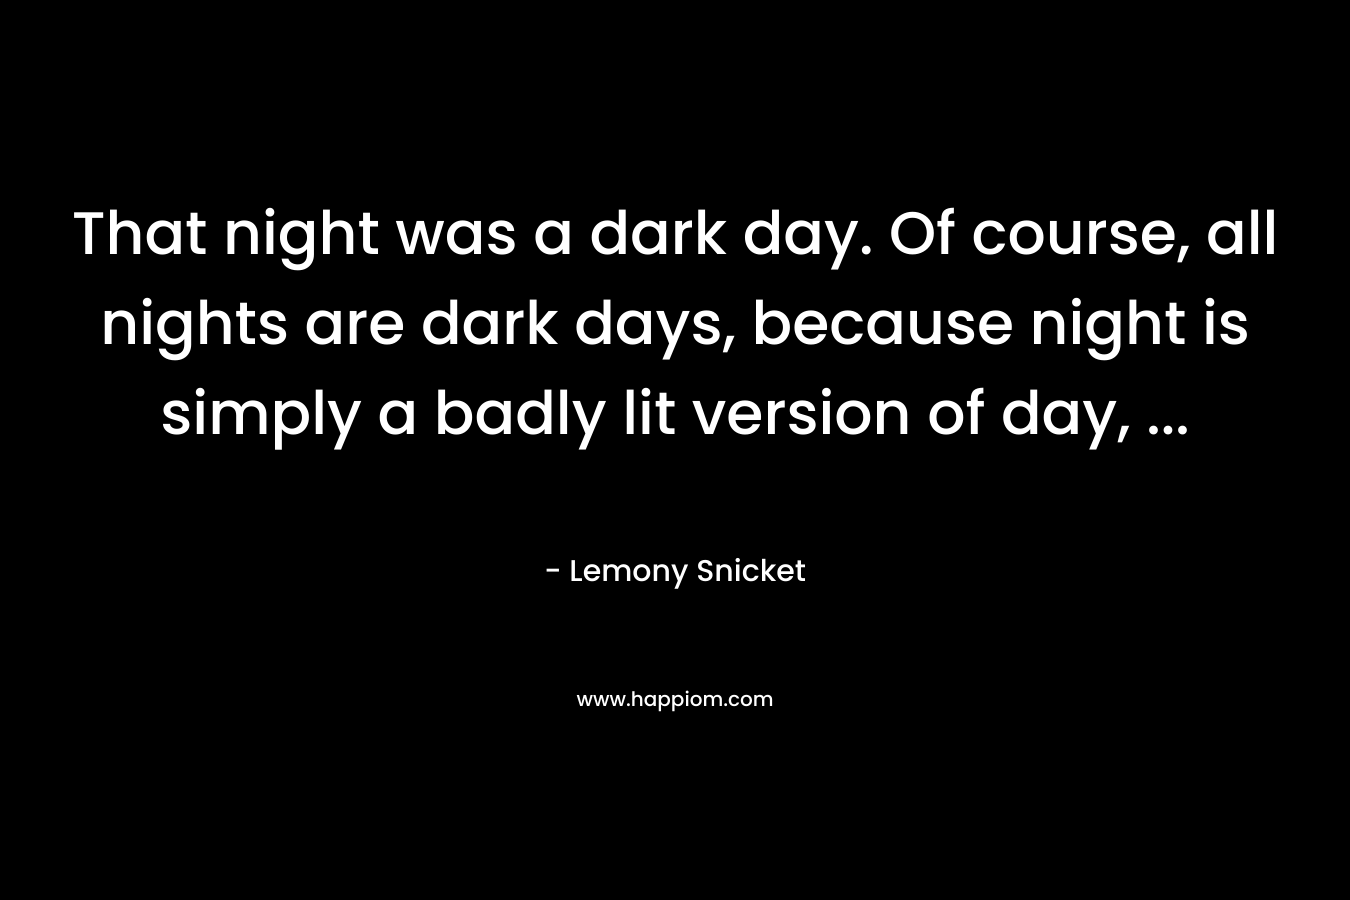 That night was a dark day. Of course, all nights are dark days, because night is simply a badly lit version of day, ...